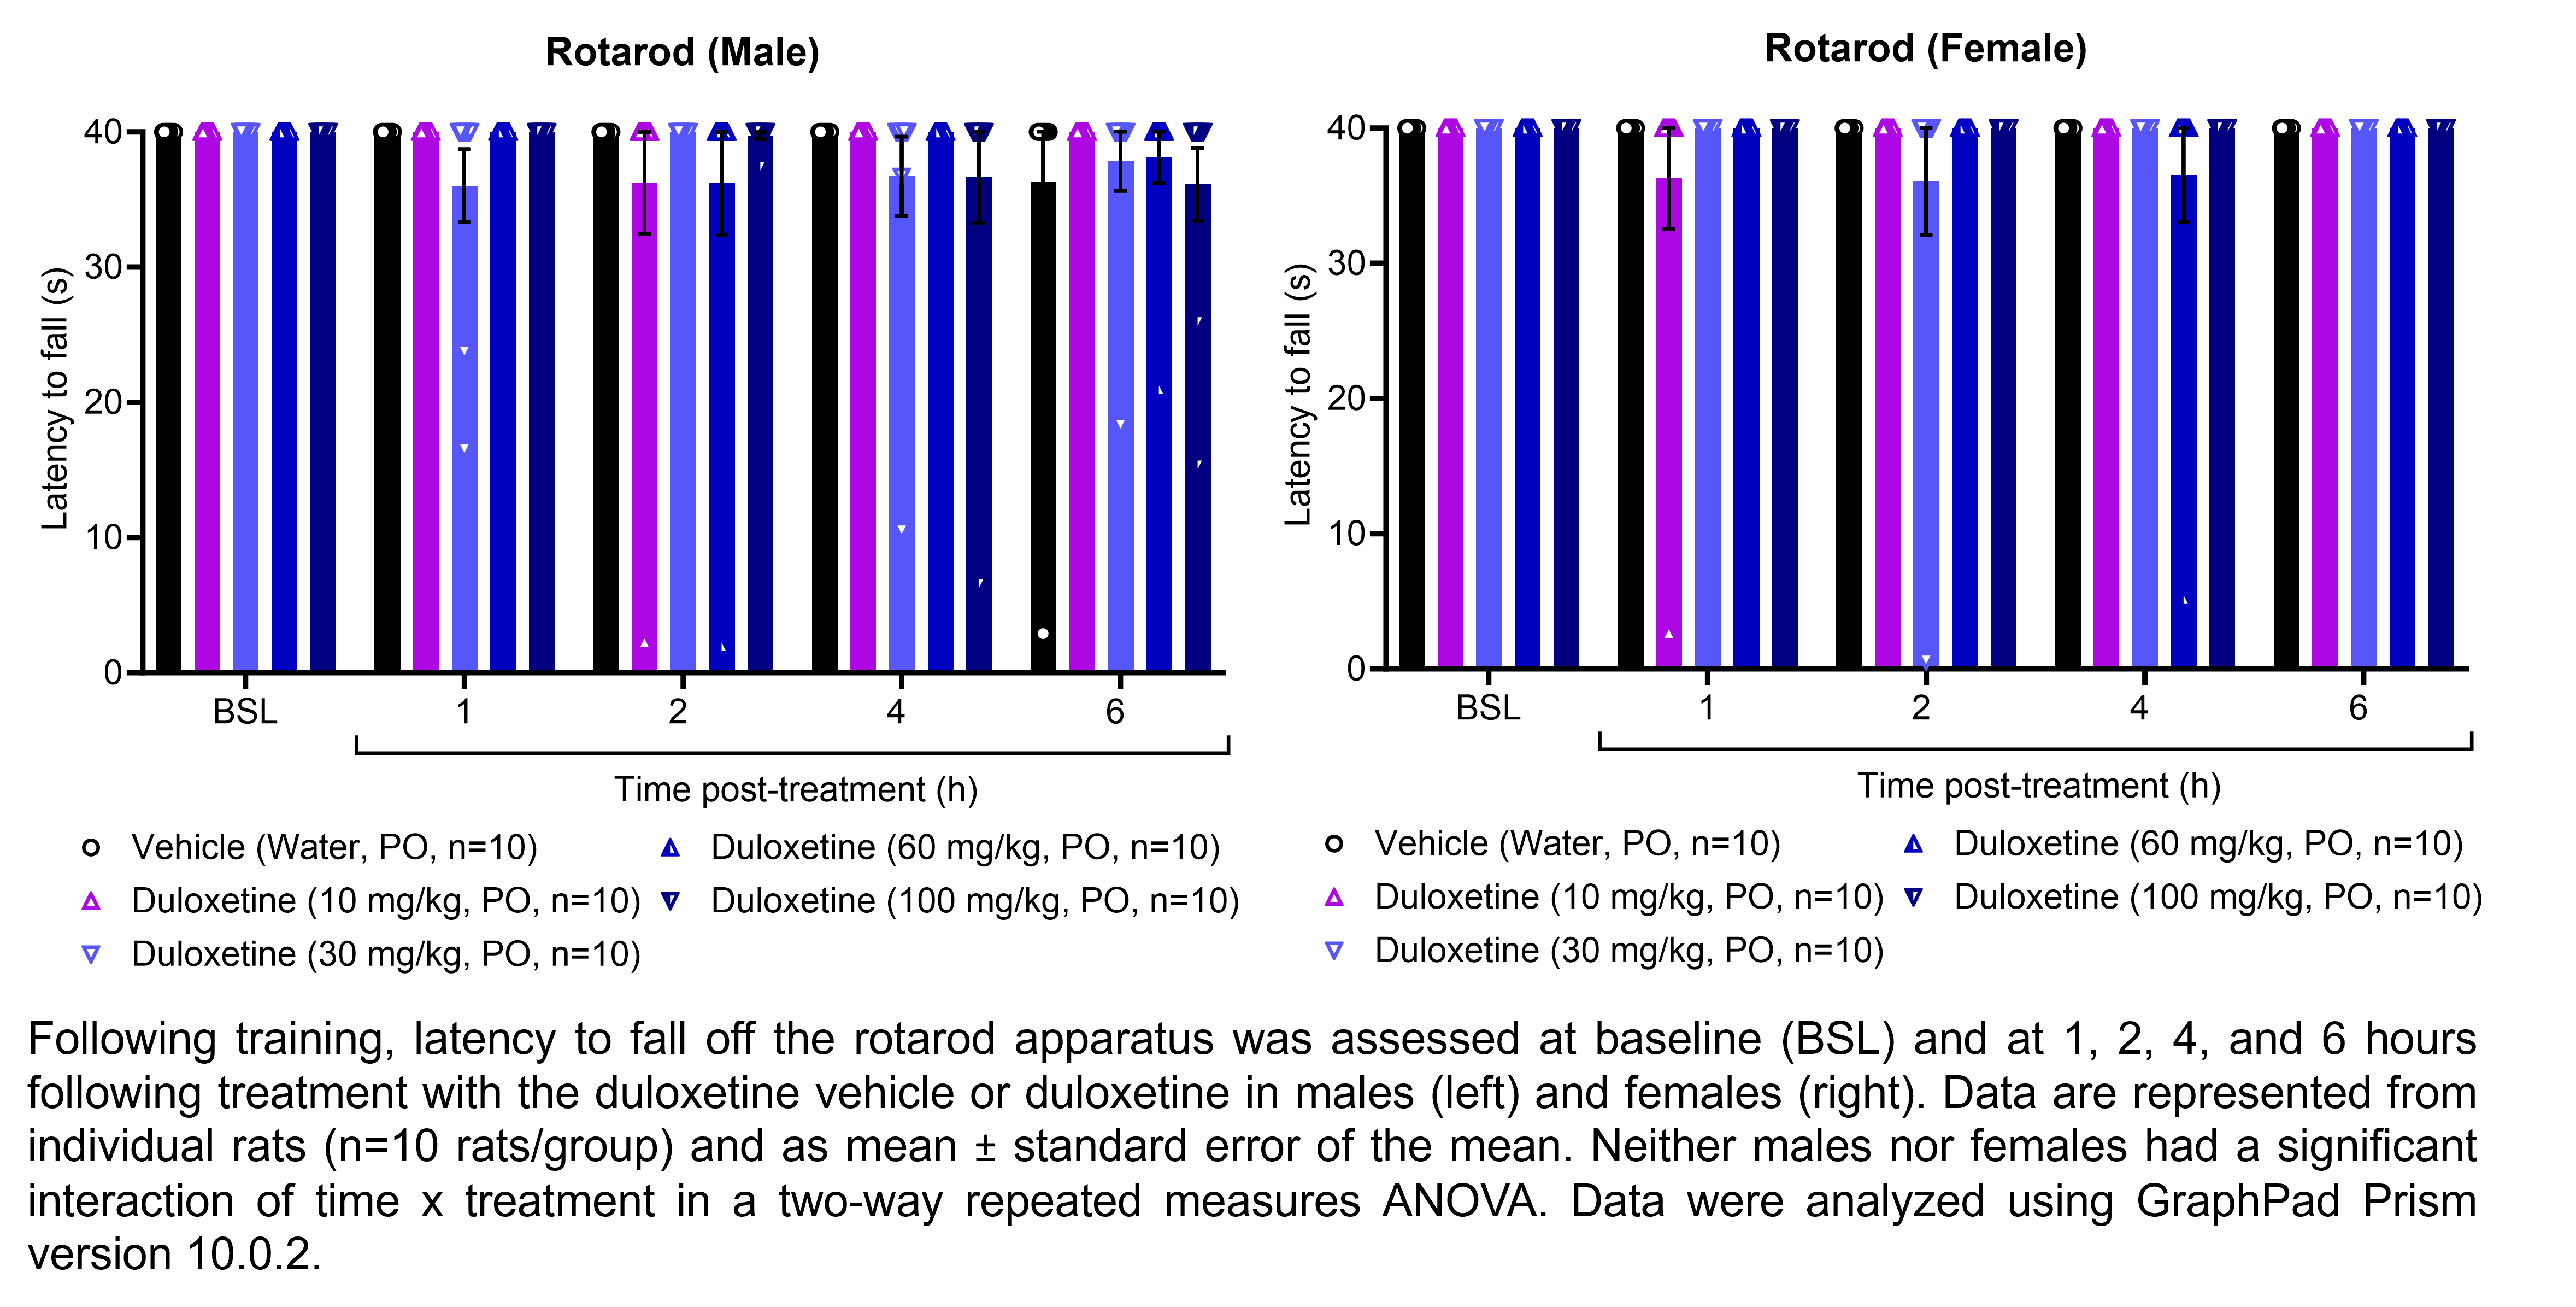 Two graphs show the latency for male or female rats to fall off a rotarod apparatus. Responses are shown at the following time points: baseline (before treatment) and at 1, 2, 4, and 6 hours after treatment with vehicle (water, delivered PO) or duloxetine (10, 30, 60, or 100 mg/kg, delivered PO). There were 10 rats per group. Neither males nor females had a significant interaction of time x treatment in a two-way repeated measures ANOVA.